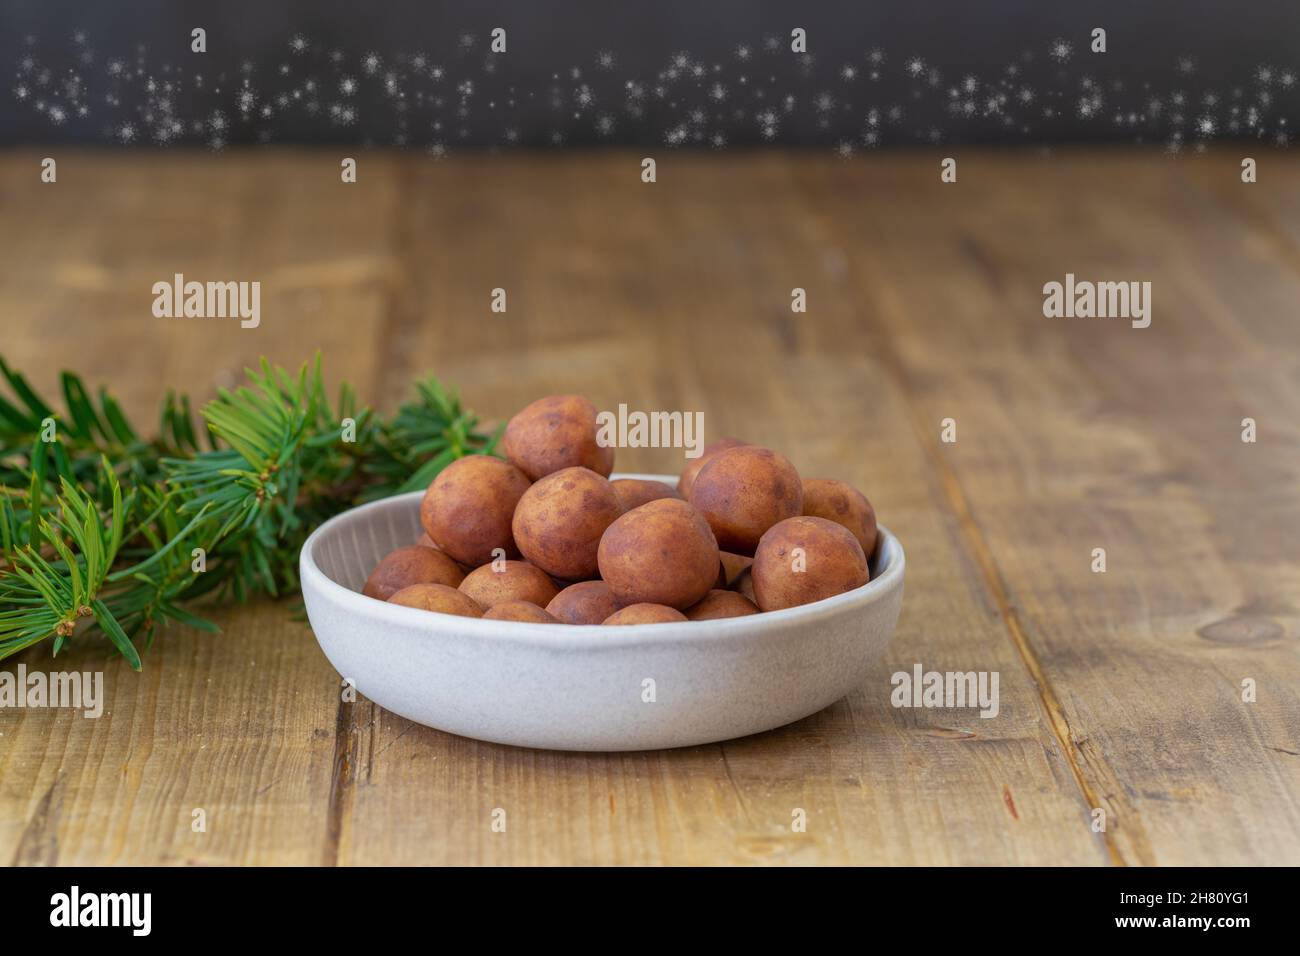 Close-up of a portion of marzipan potatoes in a little bowl on a wooden table with focus in foreground Stock Photo